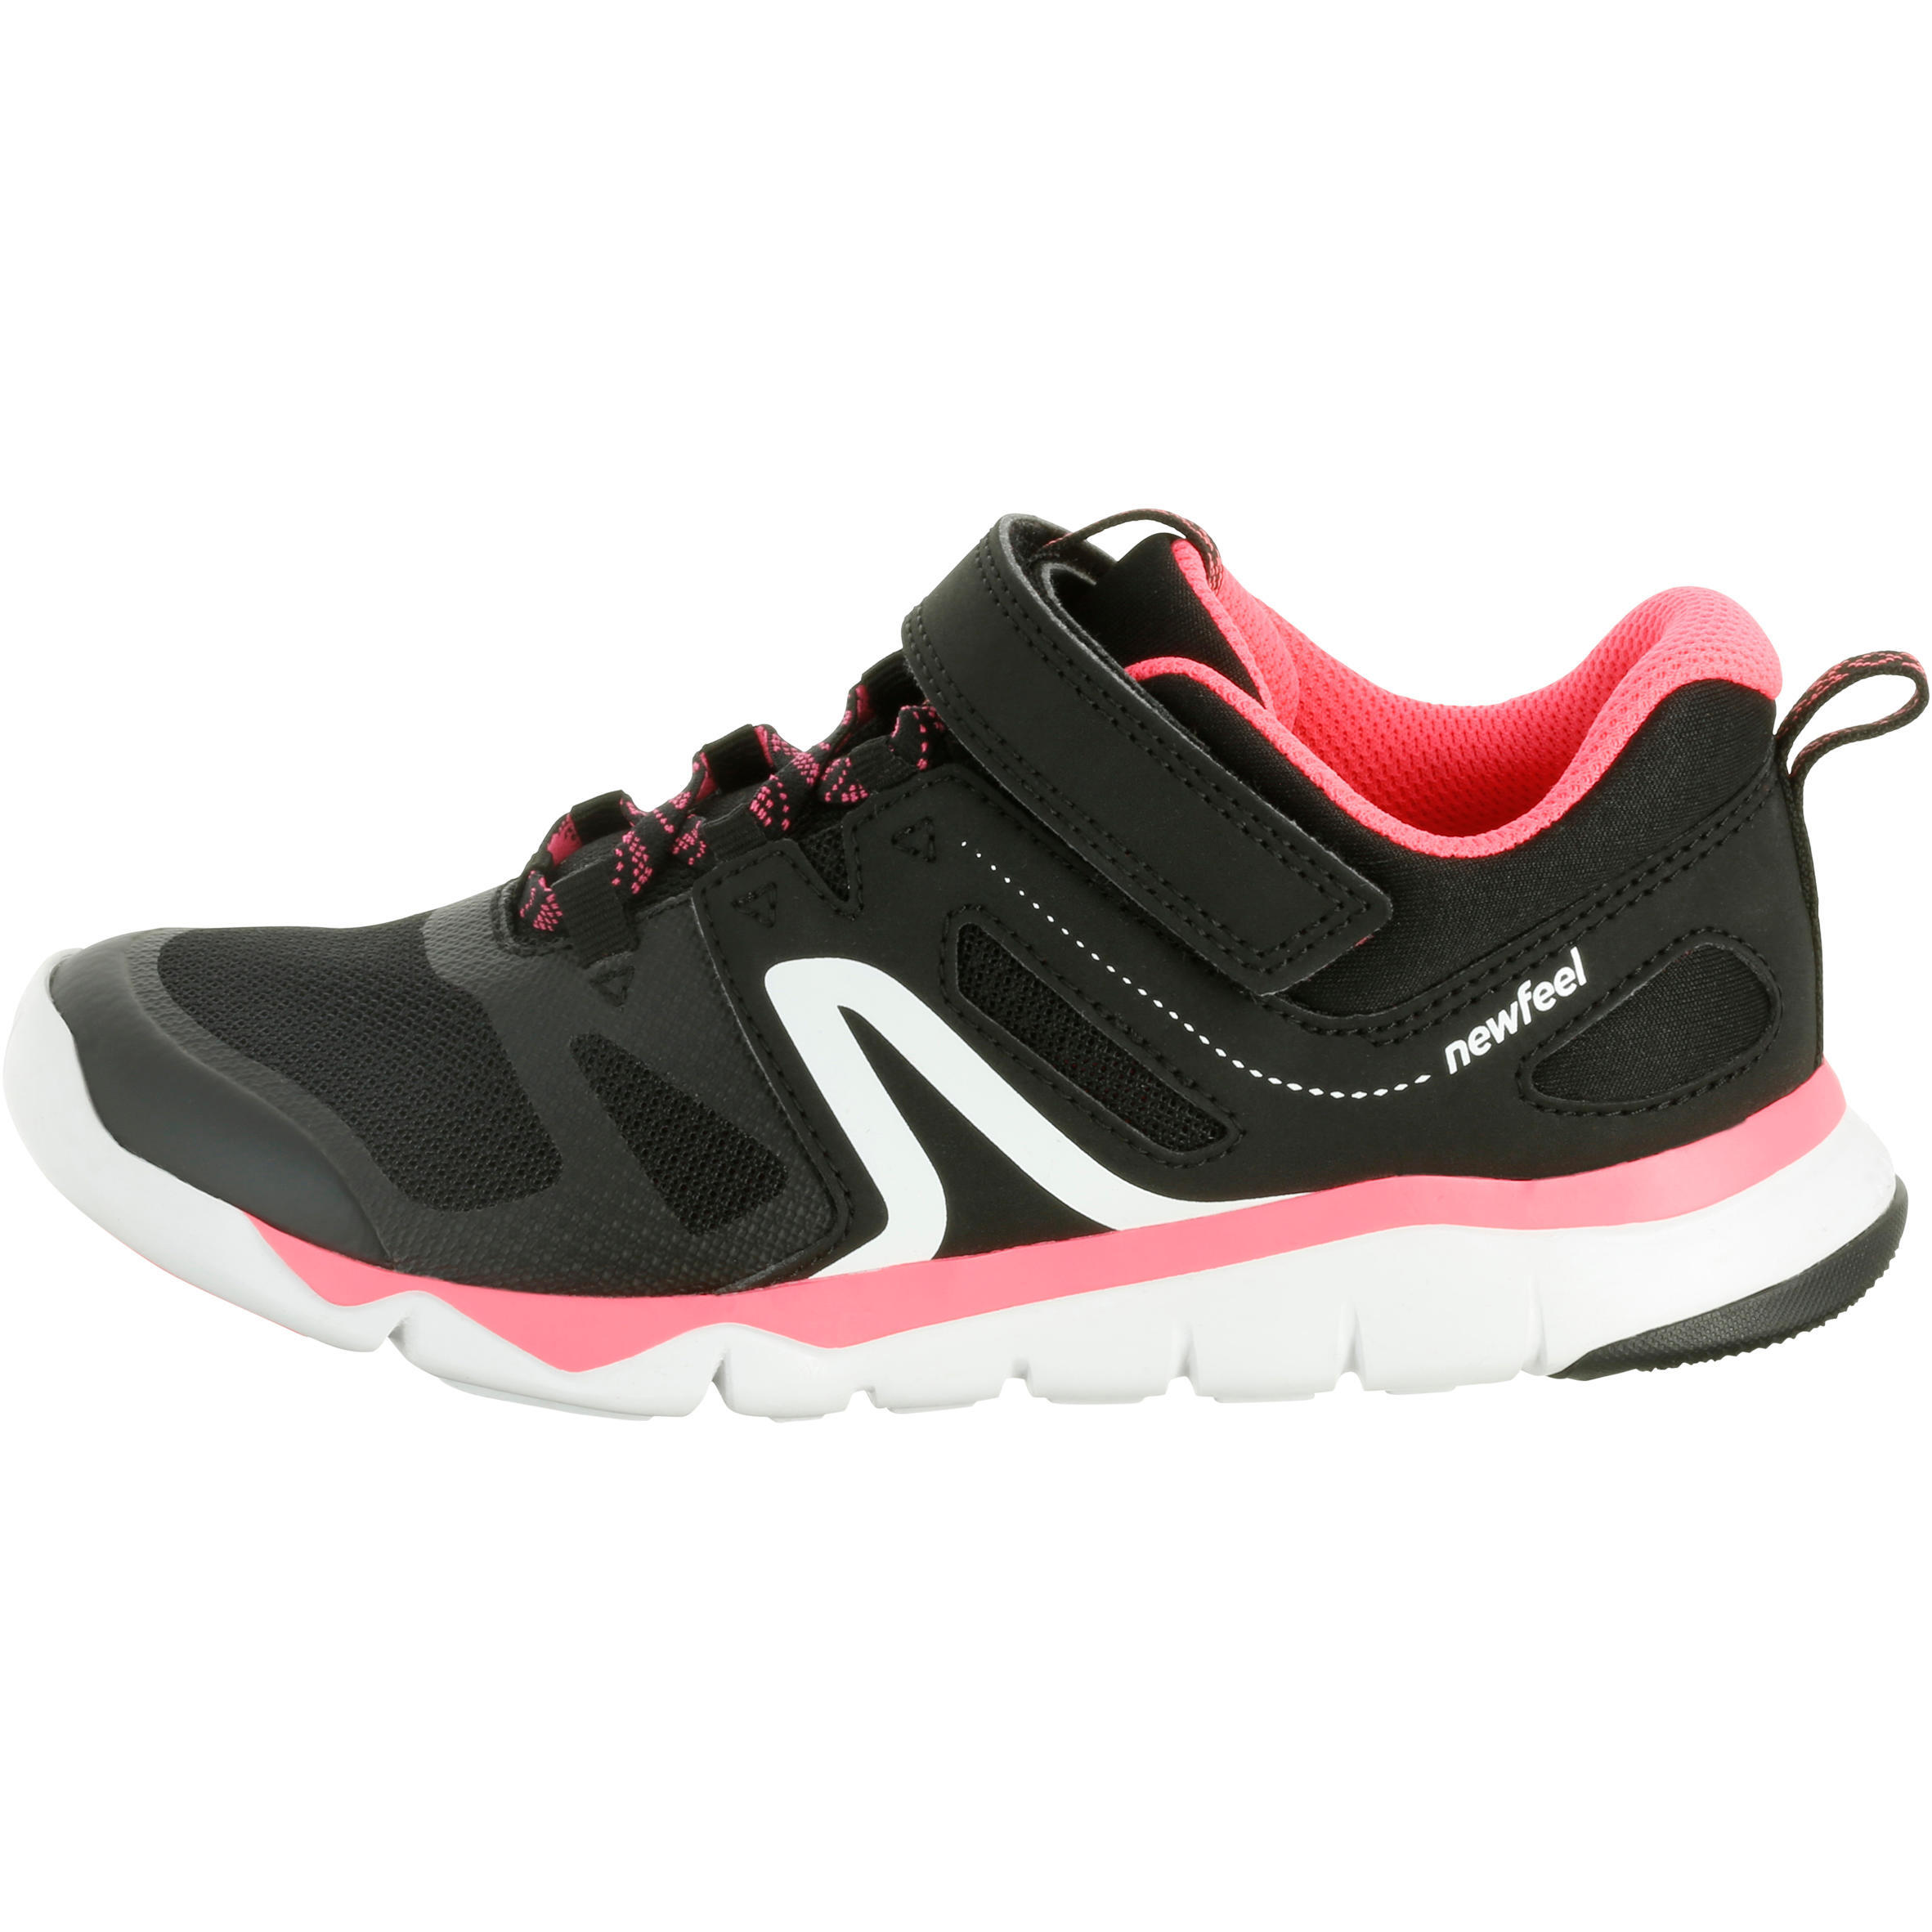 Kids' lightweight and breathable rip-tab trainers, black/pink 8/12